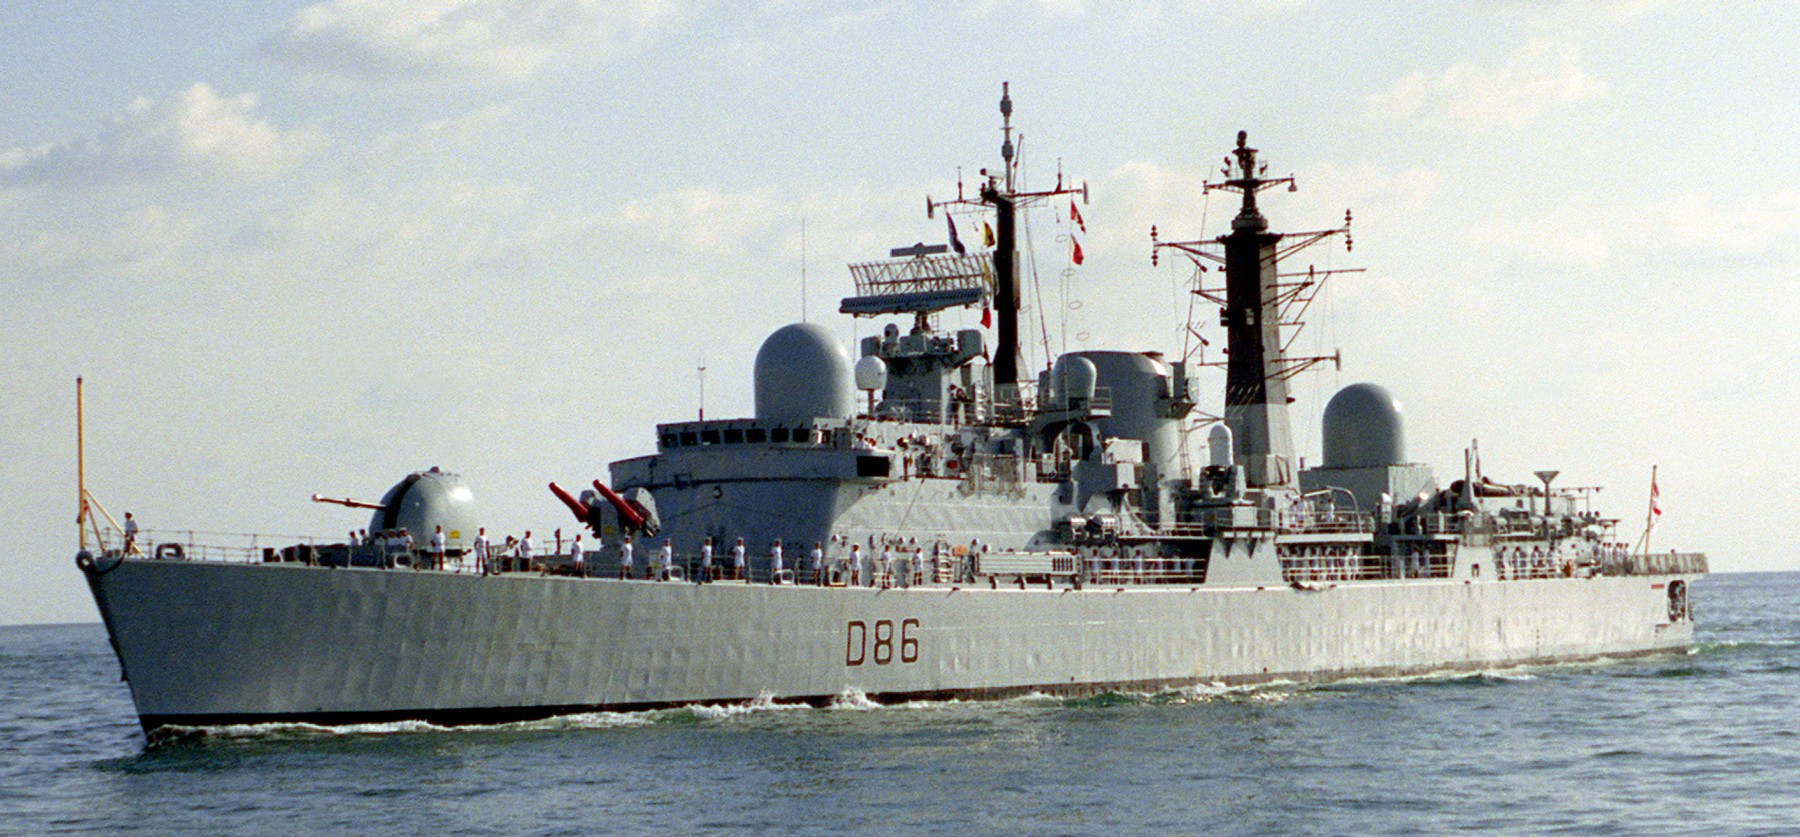 d 86 hms birmingham sheffield class type 42 guided missile destroyer